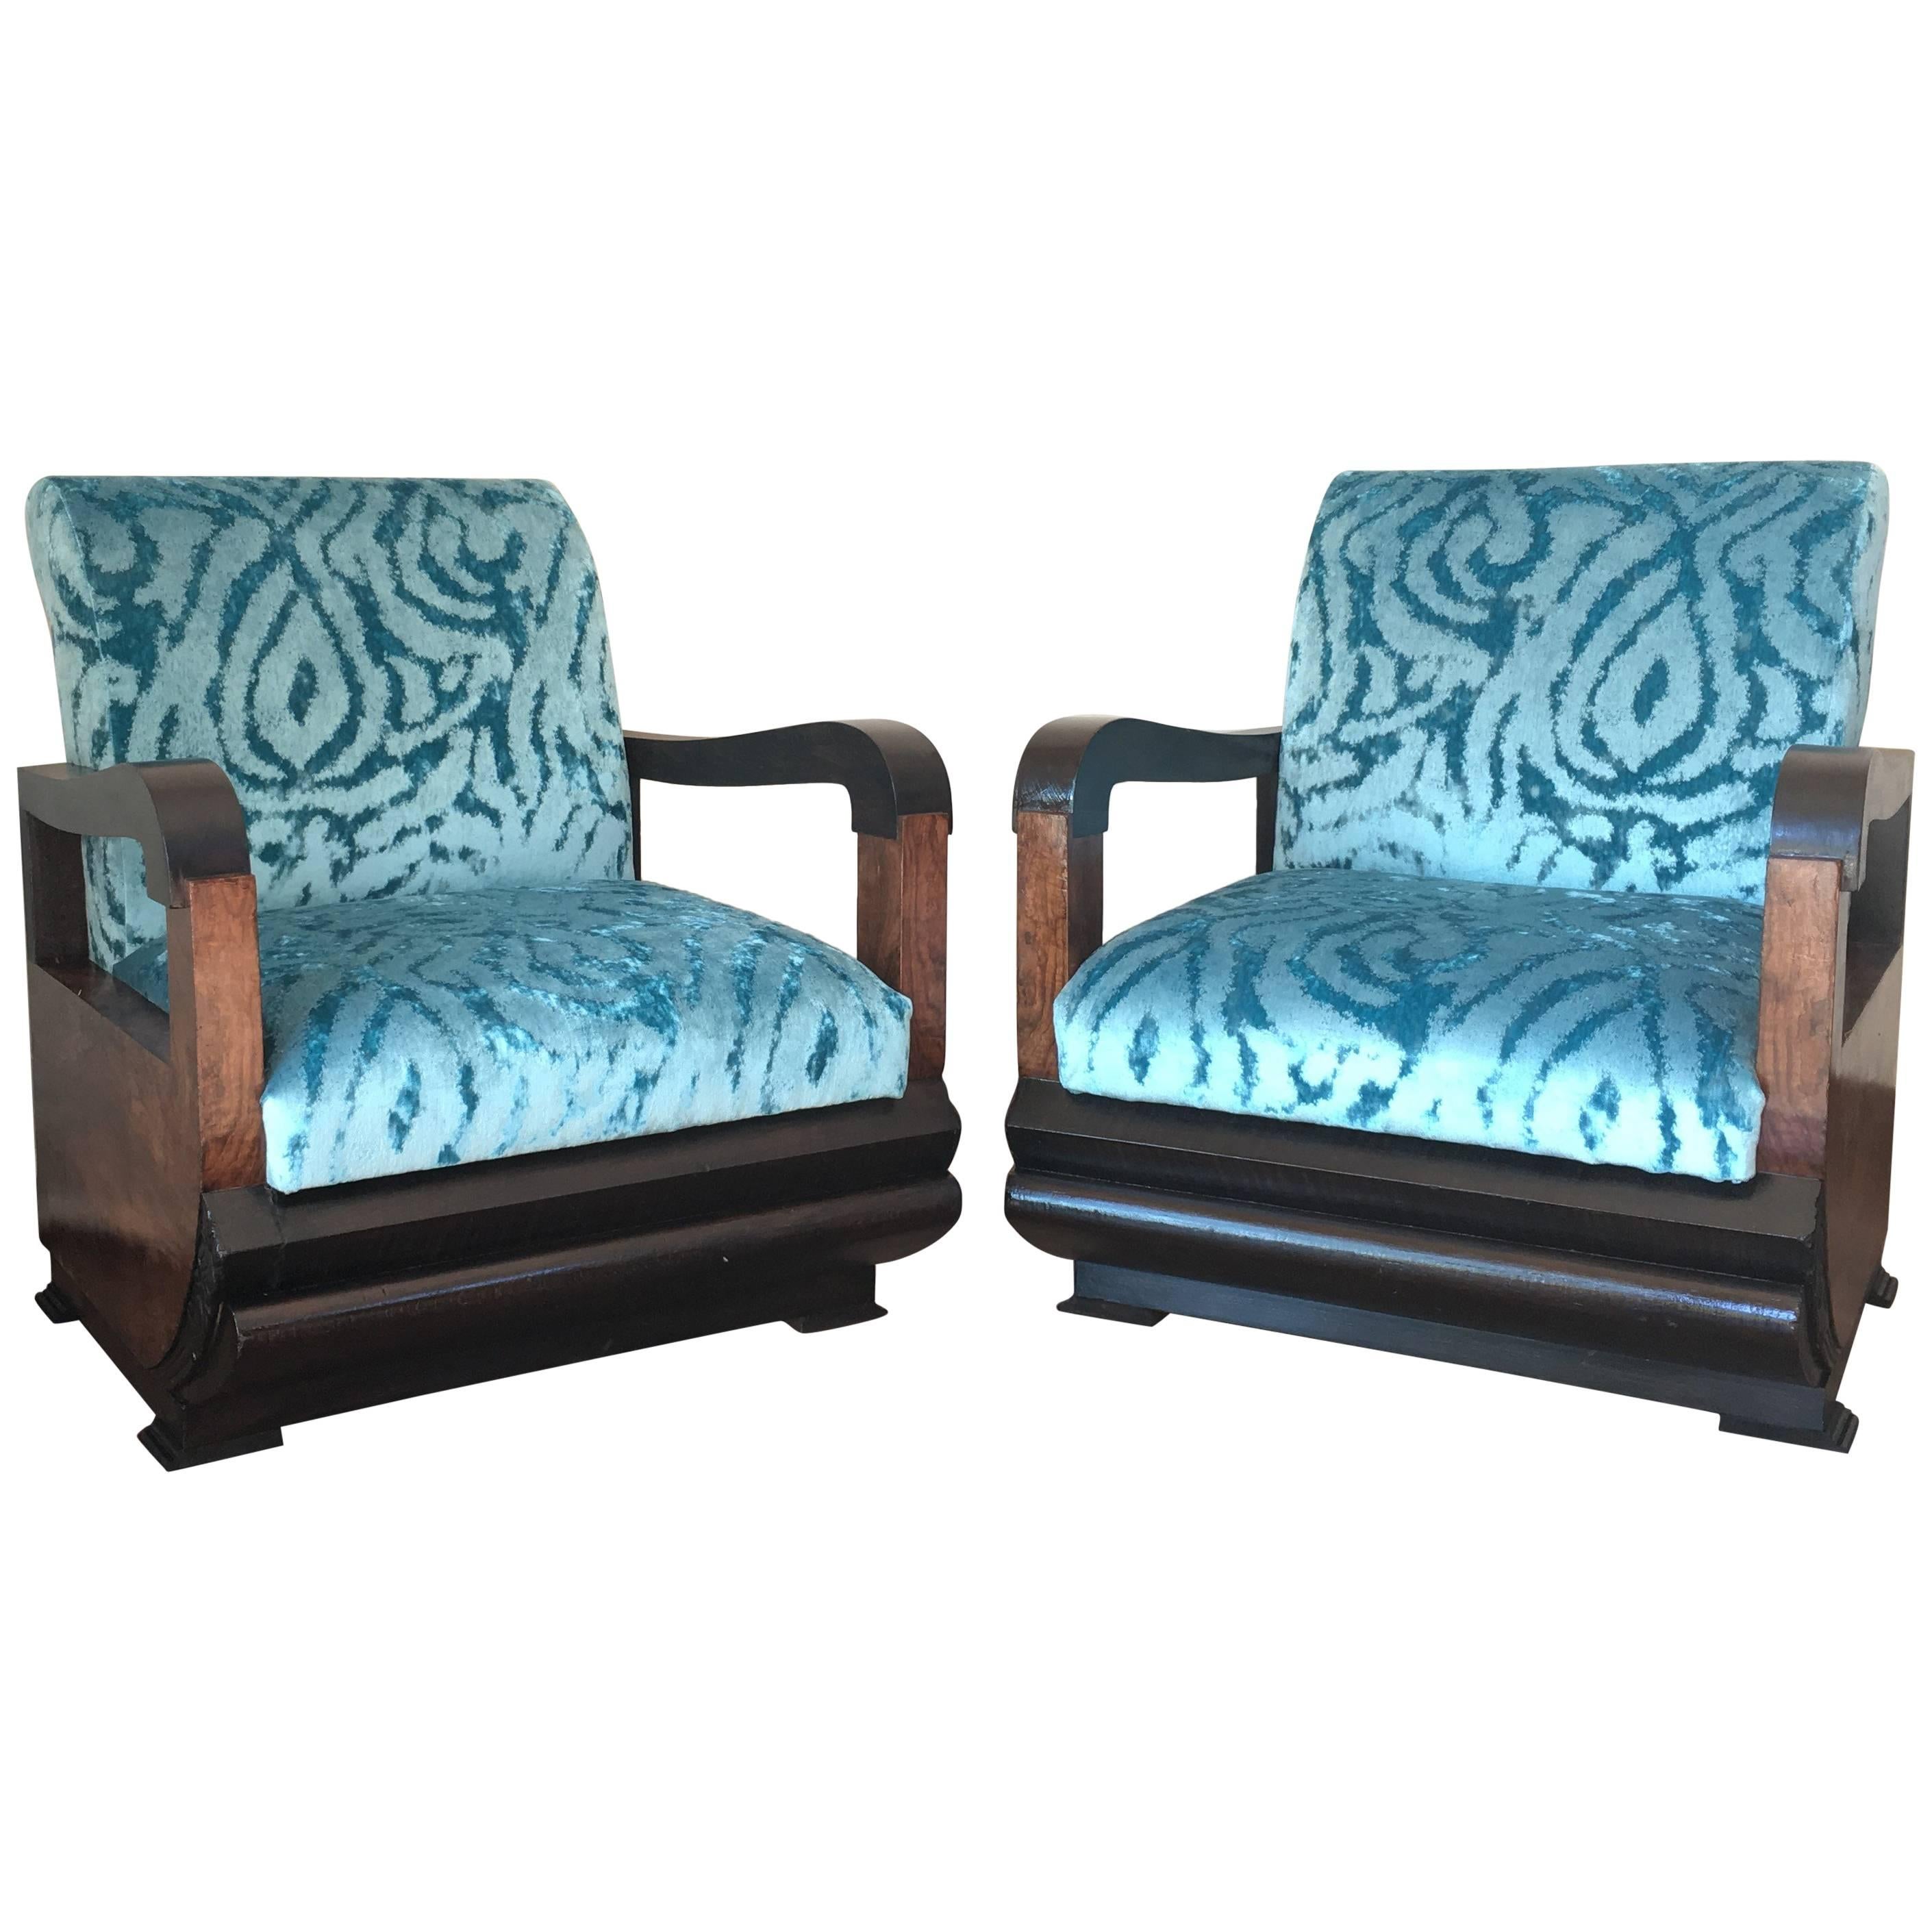 Pair of Art Deco Club Chair with Turqueoise Velvet by Lizzo, Italy